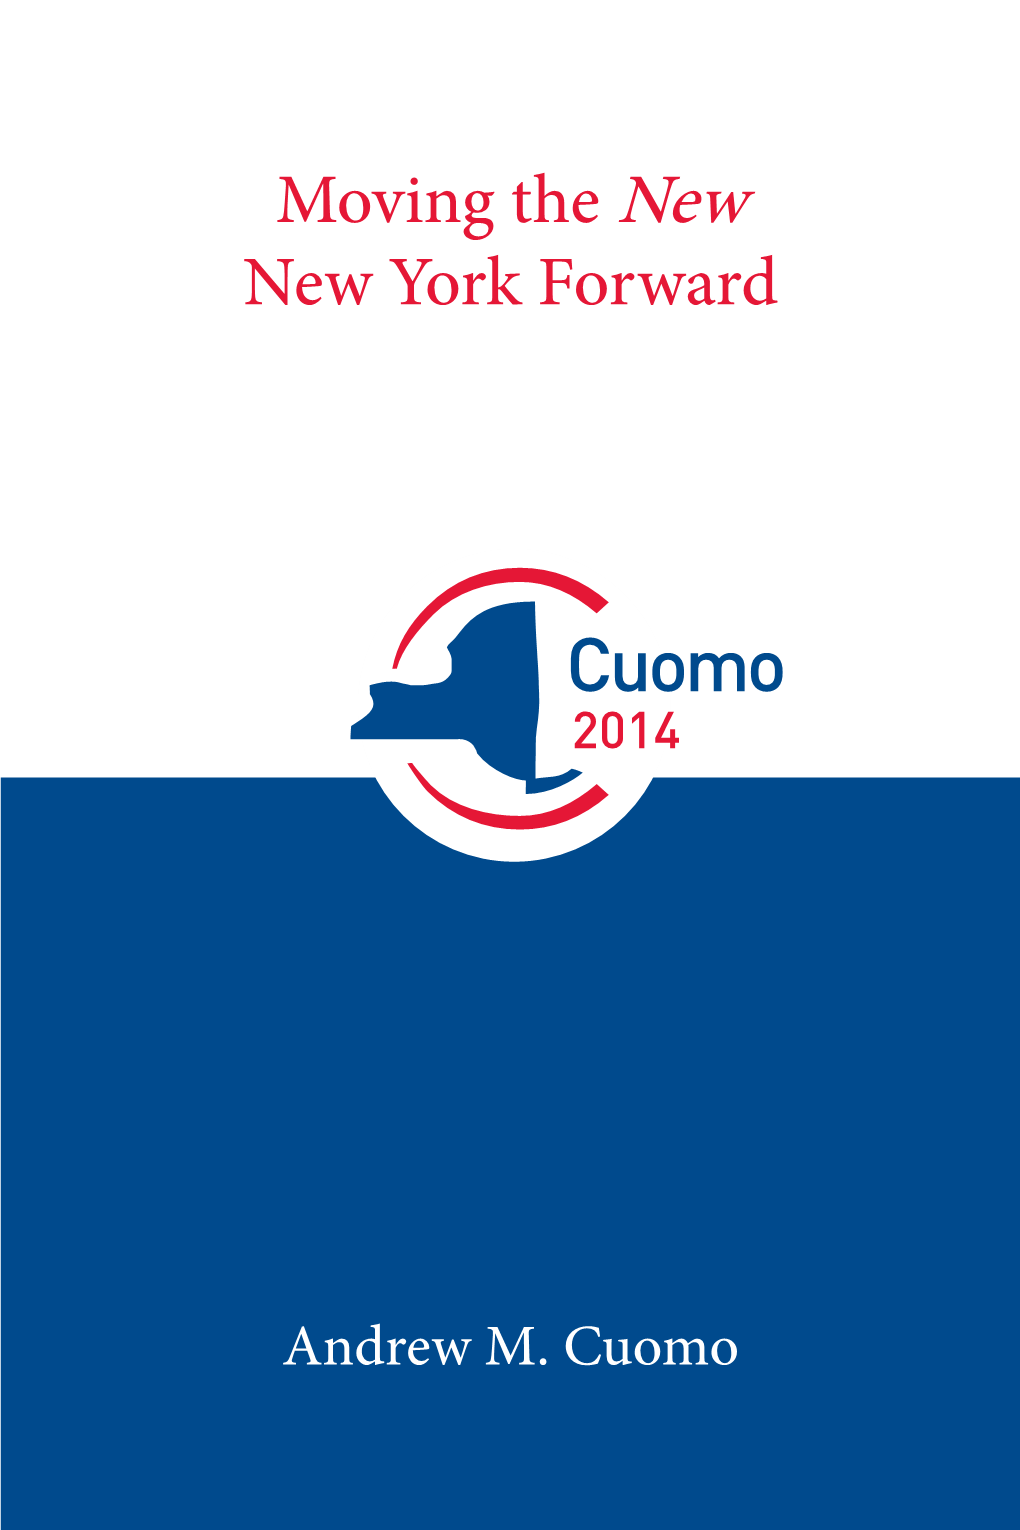 Moving the New New York Forward